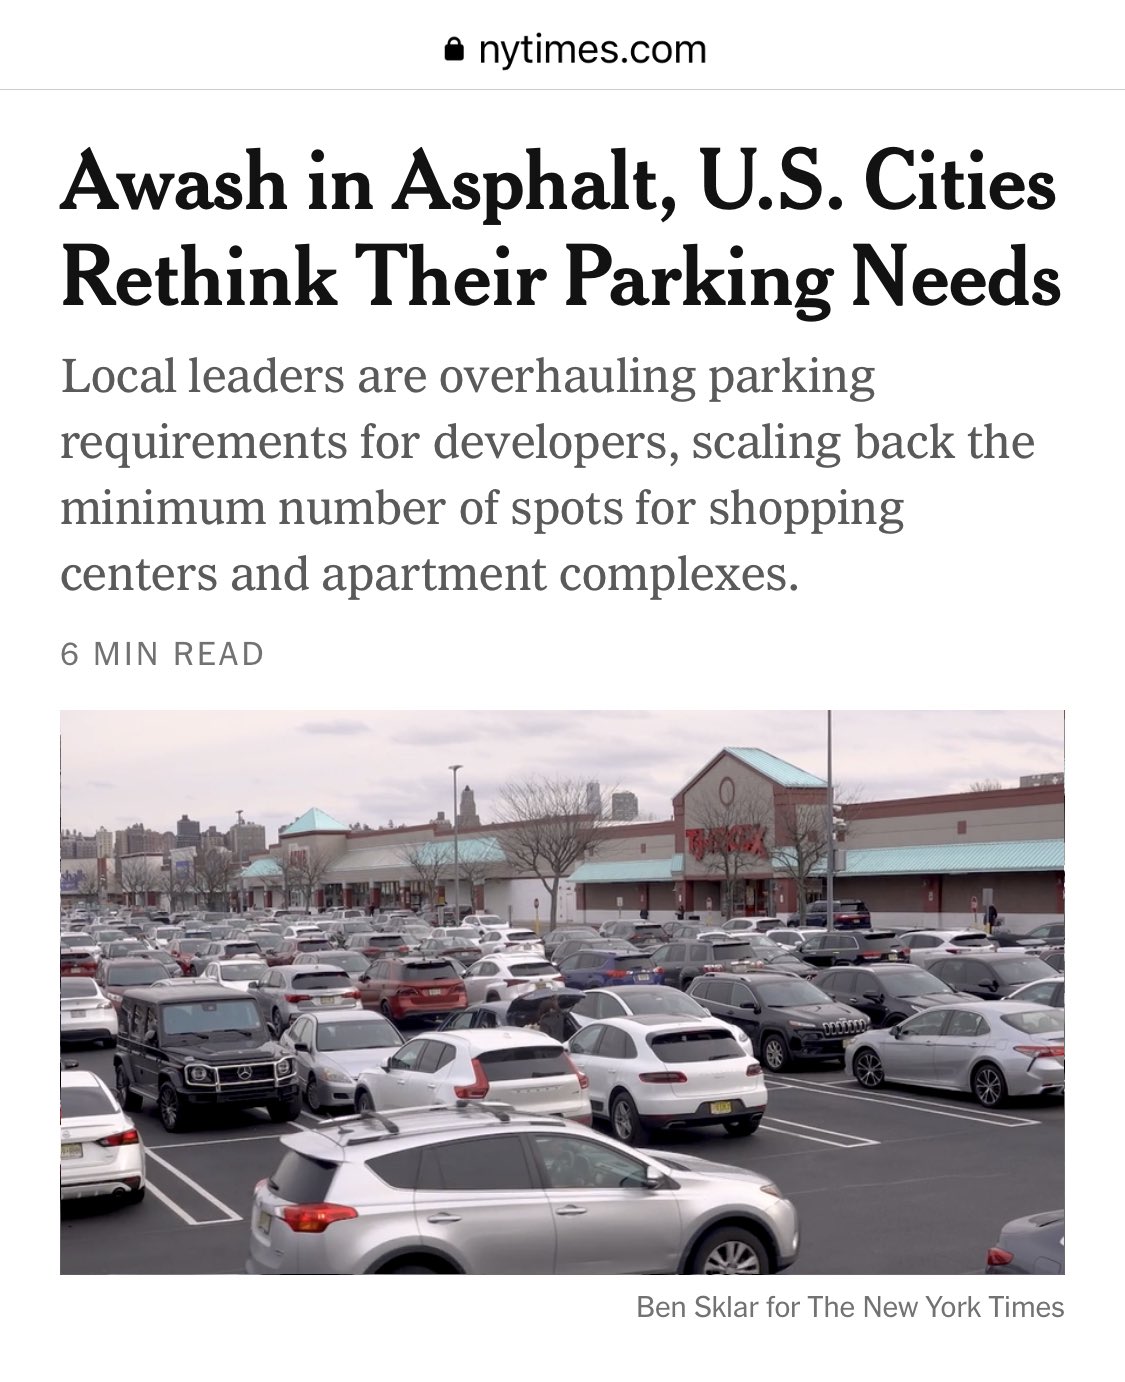 Awash in Asphalt, Cities Rethink Their Parking Needs - The New York Times